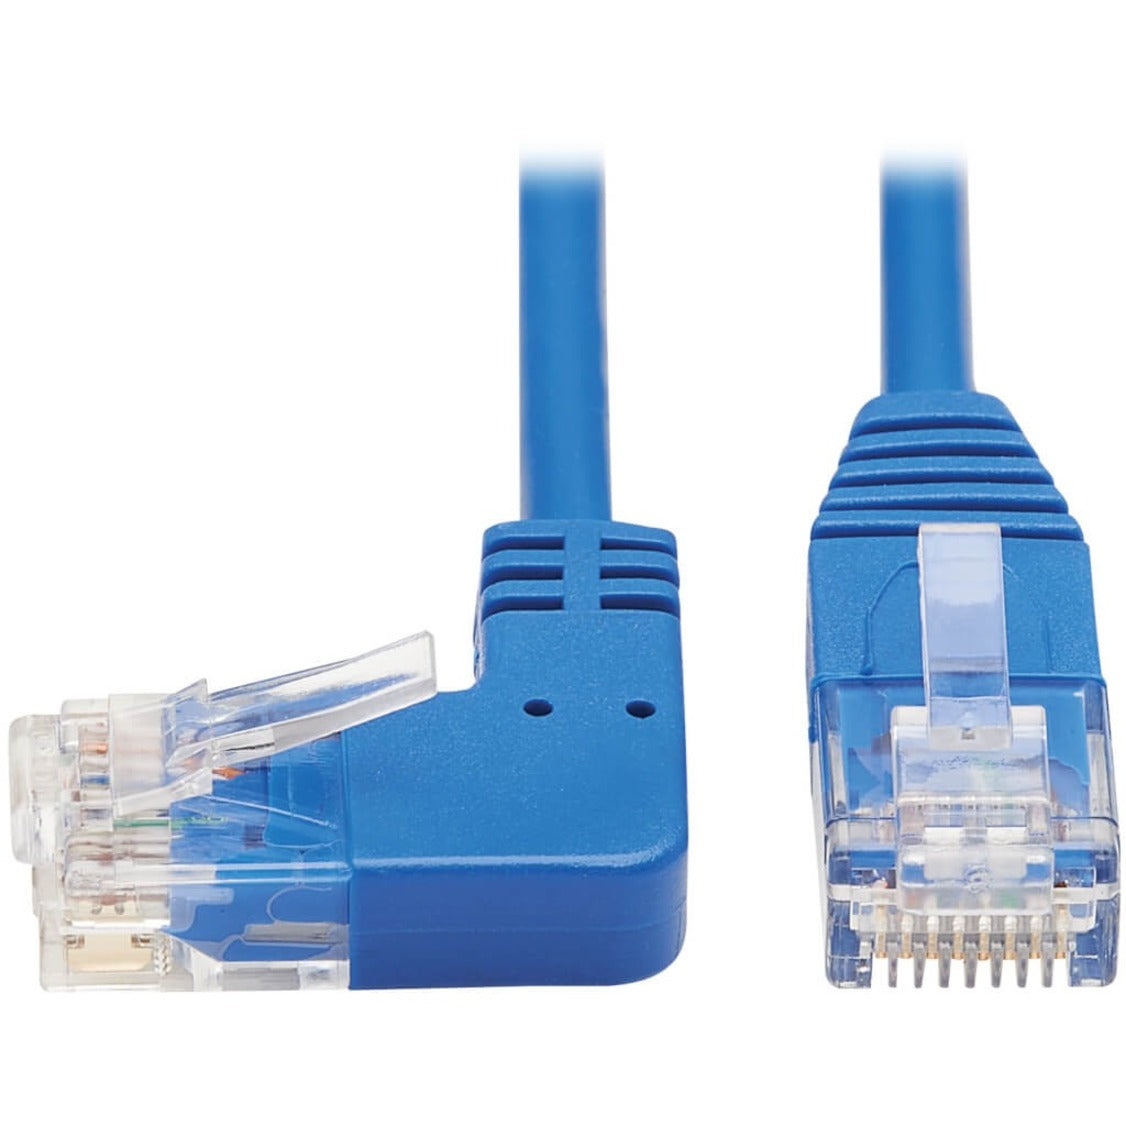 Tripp Lite N204-S10-BL-LA Cat.6 UTP Patch Network Cable, 10 ft, Molded, Stranded, 90° Angled Connector, Left-angled Connector, Bend Resistant, Stress Resistant